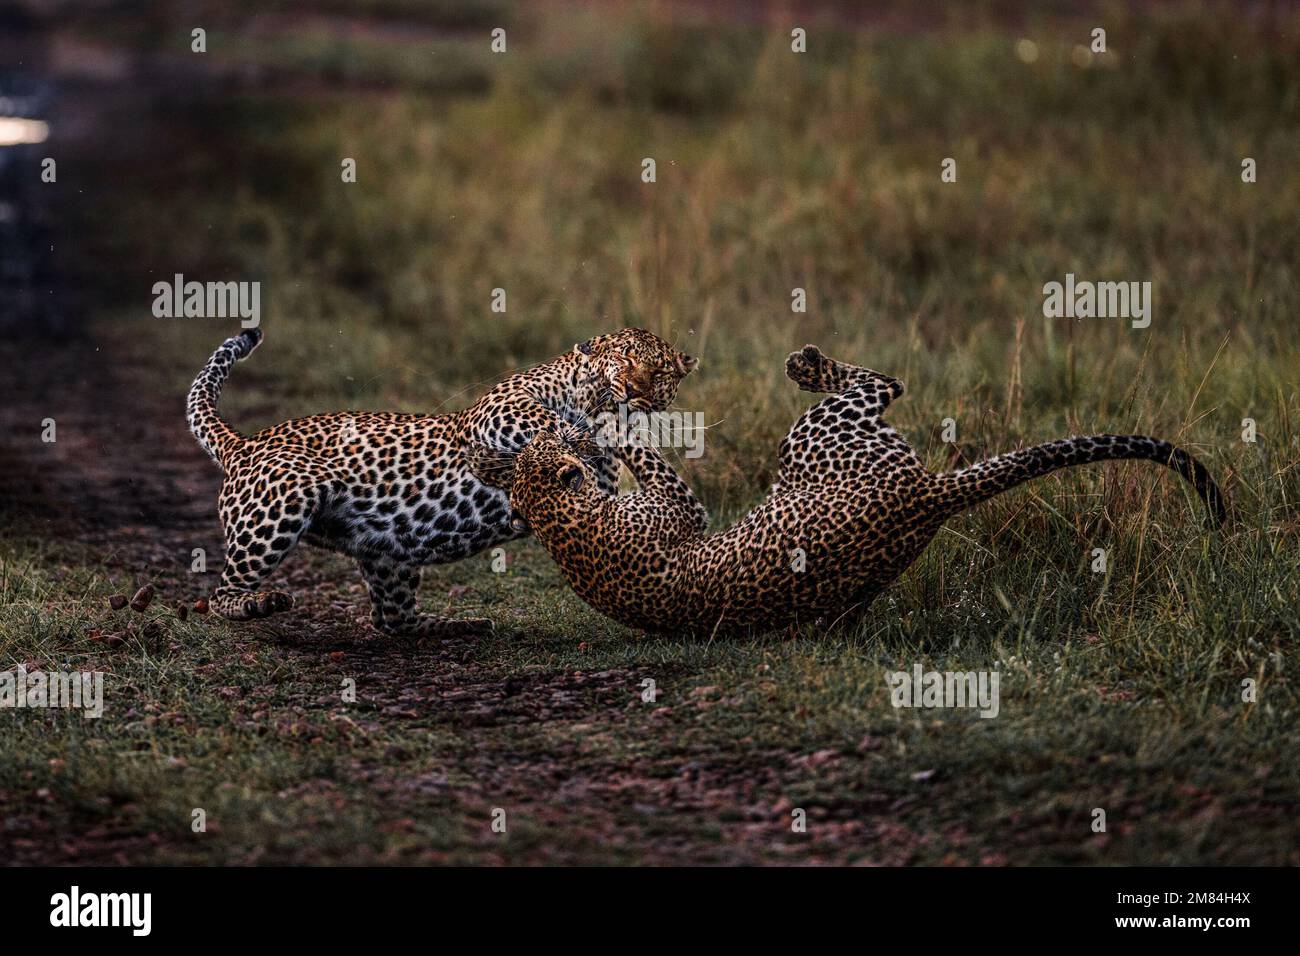 A full blown attack. Kenya: IF YOU thought you had a problem with boomerang children unwilling to fly the nest spare a thought for this mother leopard Stock Photo